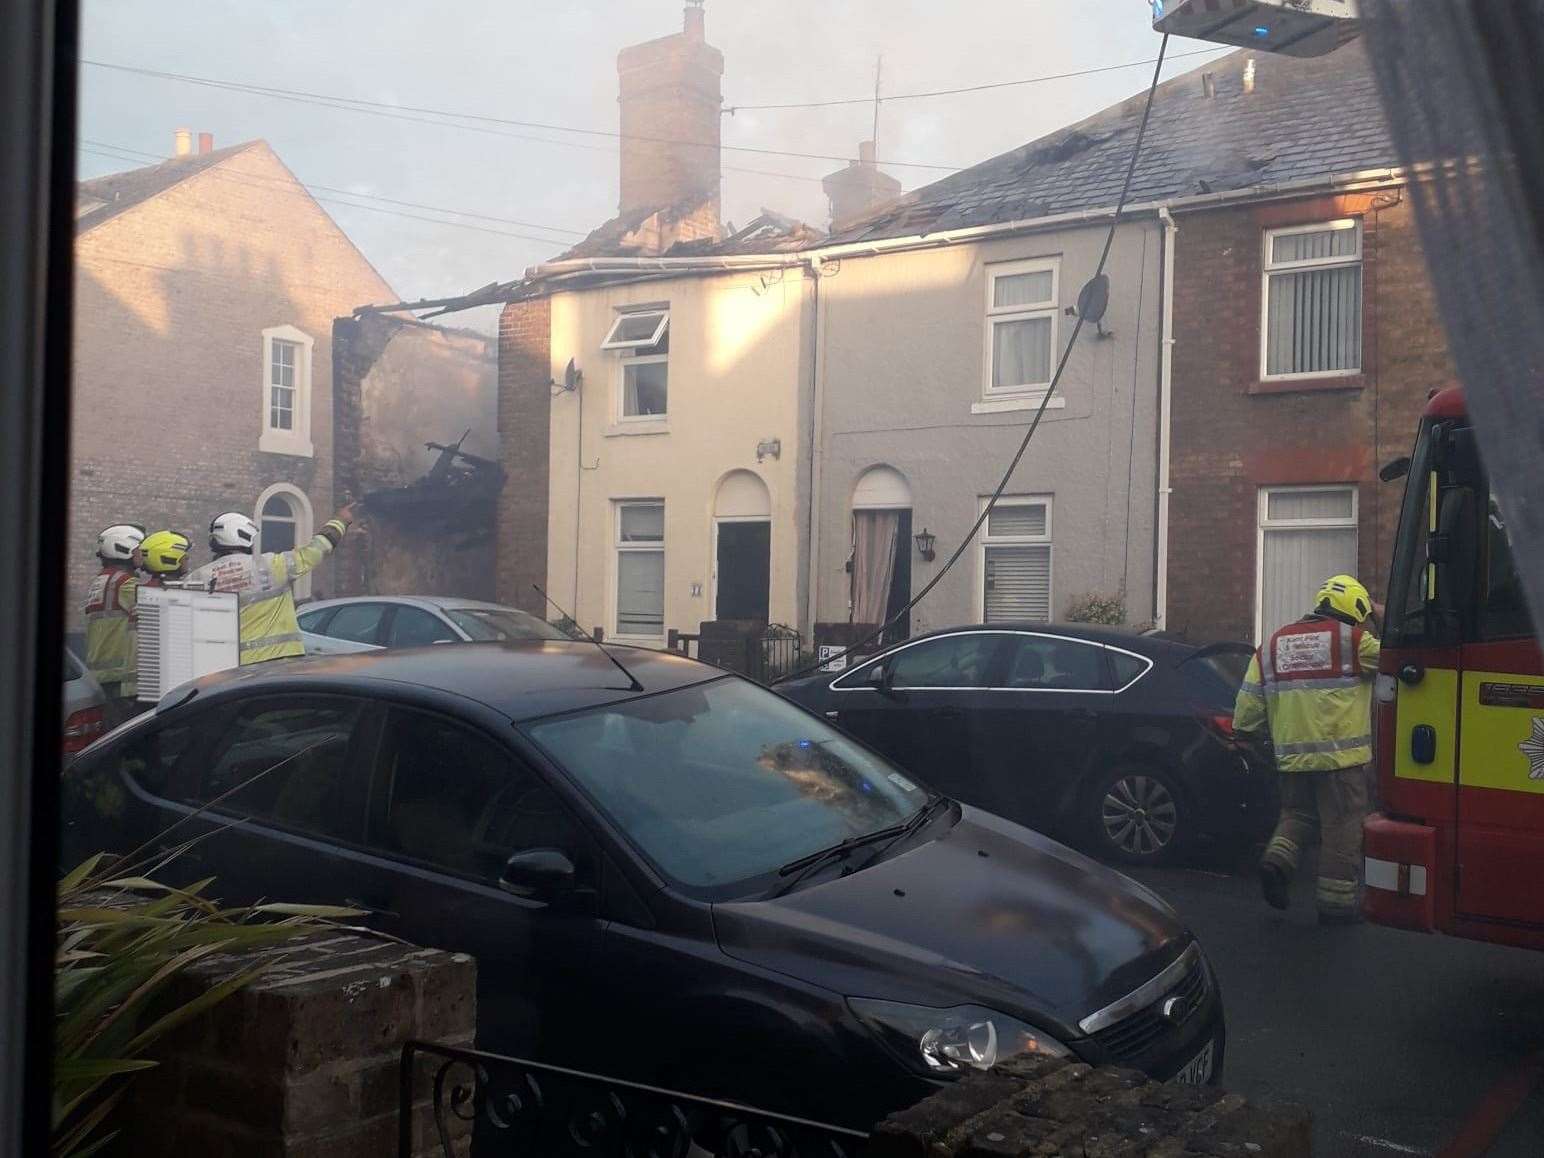 Four homes on St Mary's Road, Faversham, were affected by damage from the fire